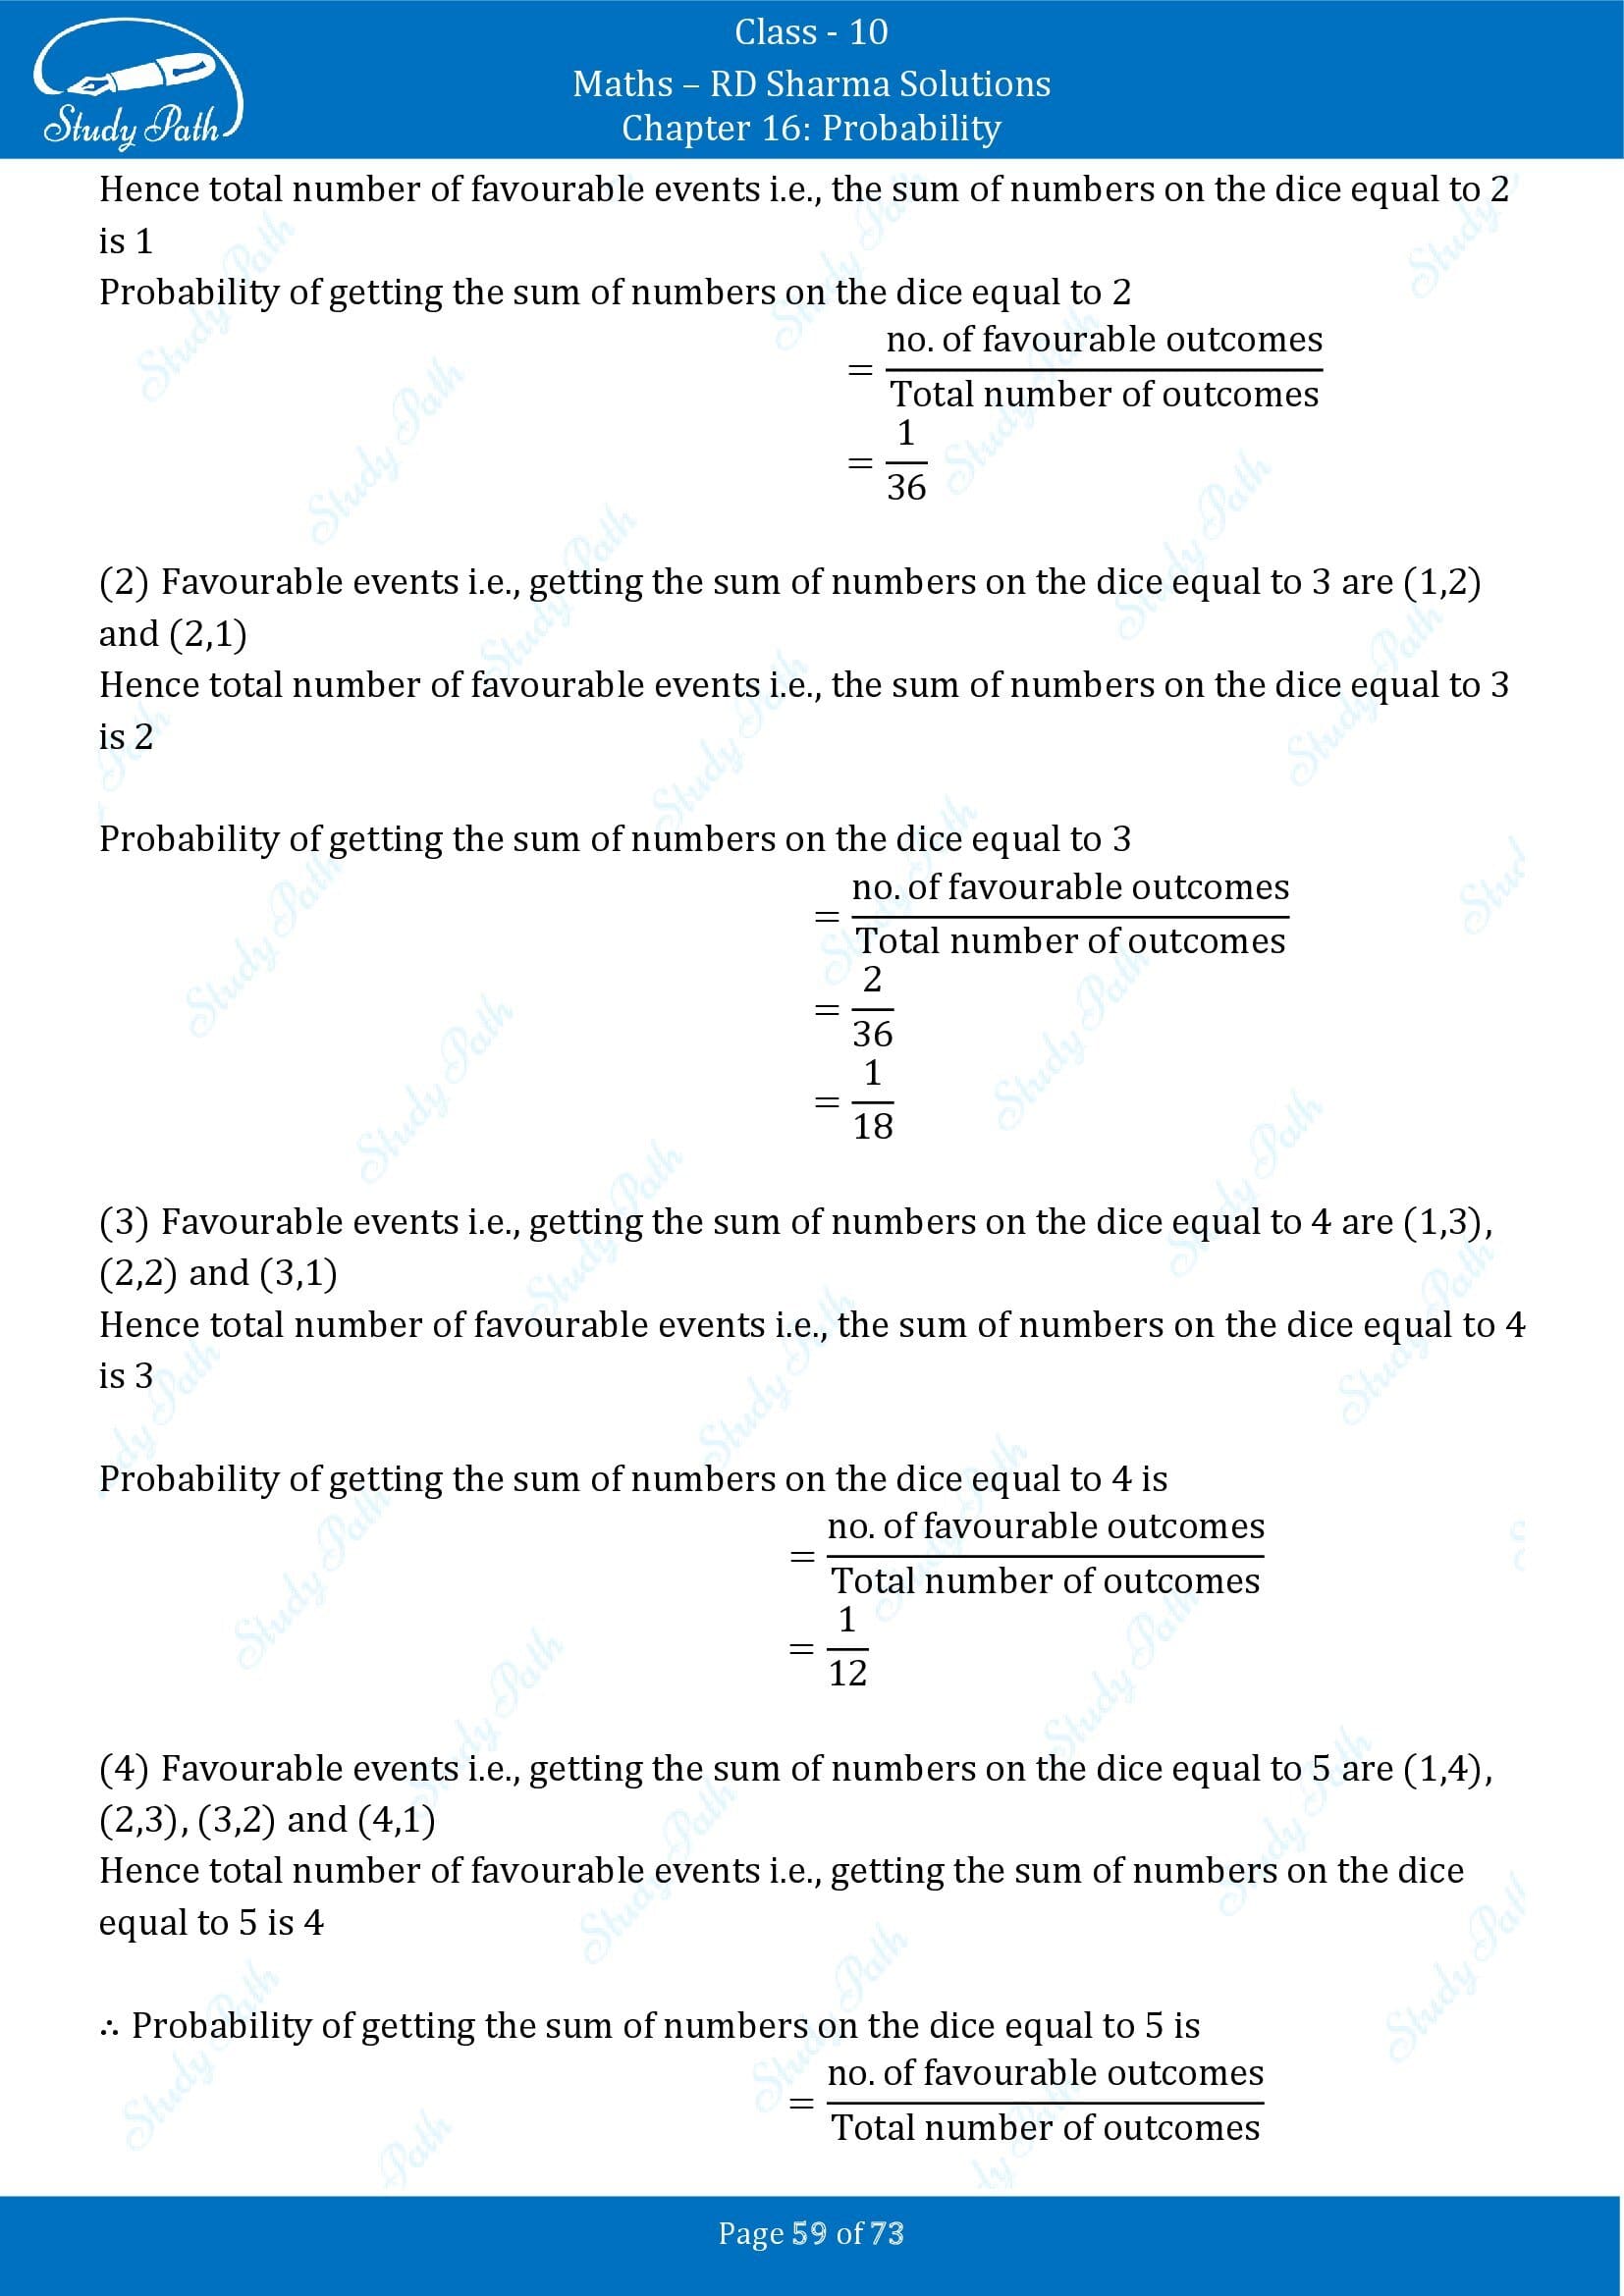 RD Sharma Solutions Class 10 Chapter 16 Probability Exercise 16.1 00059